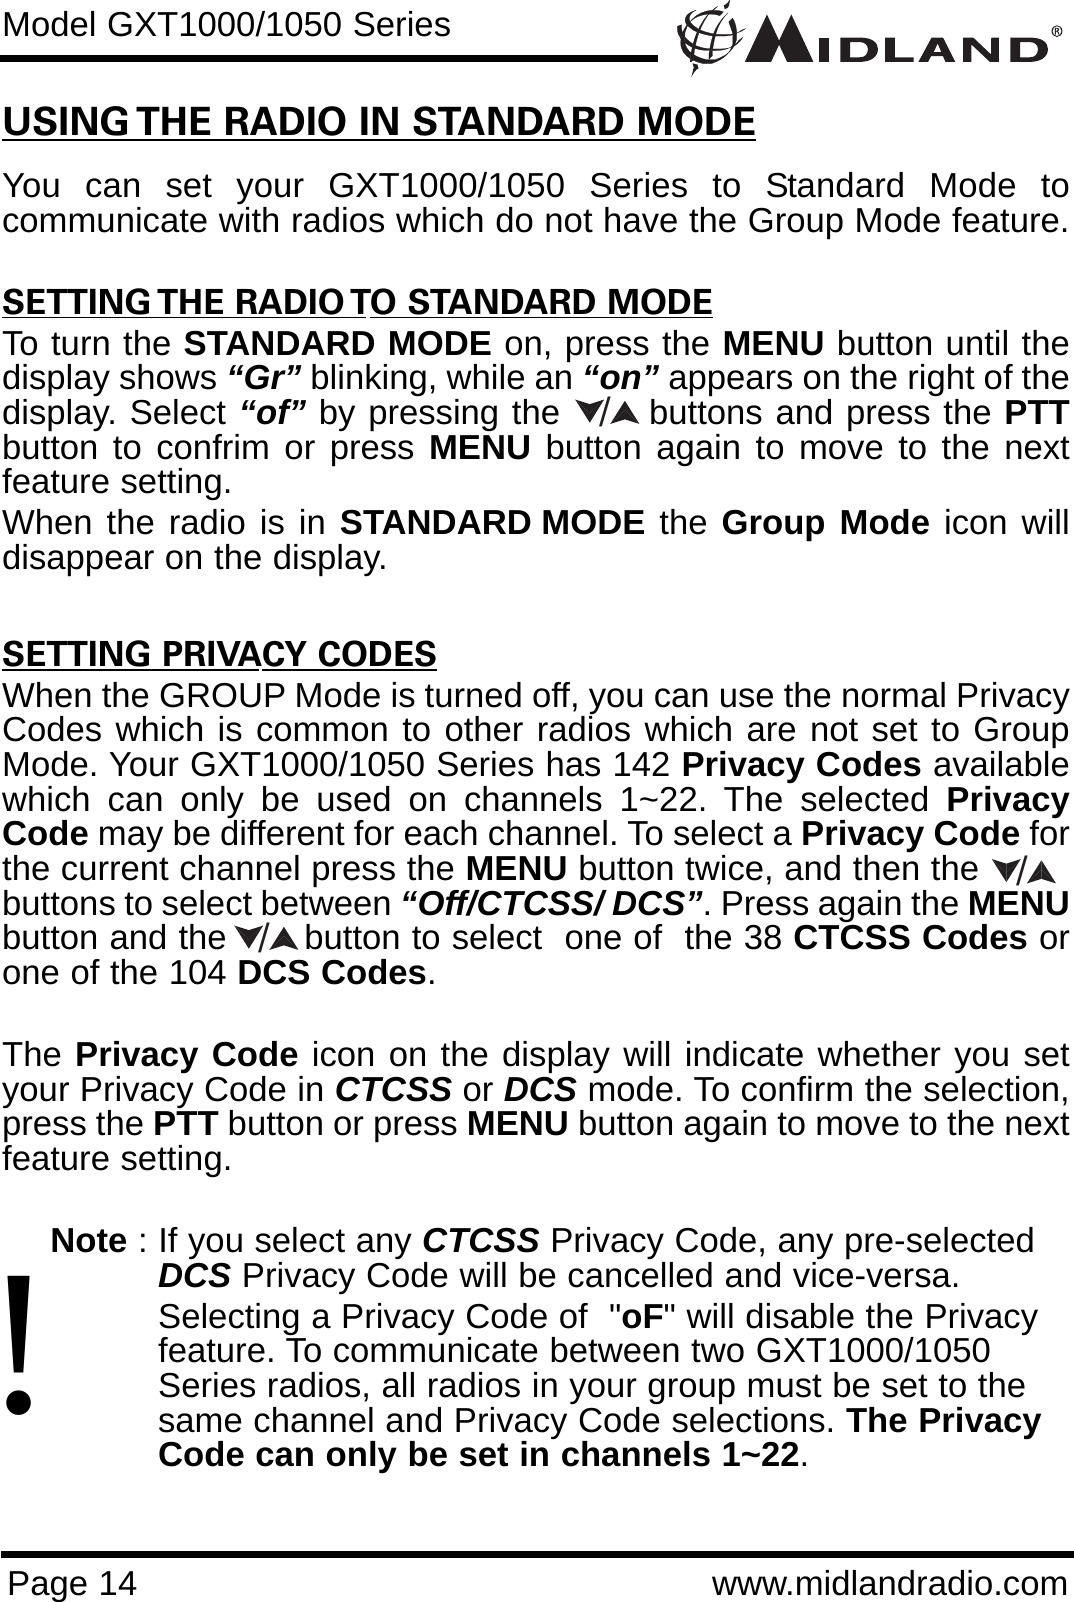 Page 14 www.midlandradio.comModel GXT1000/1050 SeriesUSING THE RADIO IN STANDARD MODEYou can set your GXT1000/1050 Series to Standard Mode tocommunicate with radios which do not have the Group Mode feature. SETTING THE RADIO TO STANDARD MODETo turn the STANDARD MODE on, press the MENU button until thedisplay shows “Gr” blinking, while an “on” appears on the right of thedisplay. Select “of” by pressing the       buttons and press the PTTbutton to confrim or press MENU button again to move to the nextfeature setting. When the radio is in STANDARD MODE the Group Mode icon willdisappear on the display.SETTING PRIVACY CODESWhen the GROUP Mode is turned off, you can use the normal PrivacyCodes which is common to other radios which are not set to GroupMode. Your GXT1000/1050 Series has 142 Privacy Codes availablewhich can only be used on channels 1~22. The selected PrivacyCode may be different for each channel. To select a Privacy Code forthe current channel press the MENU button twice, and then the        buttons to select between “Off/CTCSS/ DCS”. Press again the MENUbutton and the       button to select  one of  the 38 CTCSS Codes orone of the 104 DCS Codes. The Privacy Code icon on the display will indicate whether you setyour Privacy Code in CTCSS or DCS mode. To confirm the selection,press the PTT button or press MENU button again to move to the nextfeature setting.Note : If you select any CTCSS Privacy Code, any pre-selected DCS Privacy Code will be cancelled and vice-versa.Selecting a Privacy Code of  &quot;oF&quot; will disable the Privacy feature. To communicate between two GXT1000/1050 Series radios, all radios in your group must be set to the same channel and Privacy Code selections. The Privacy Code can only be set in channels 1~22.///!